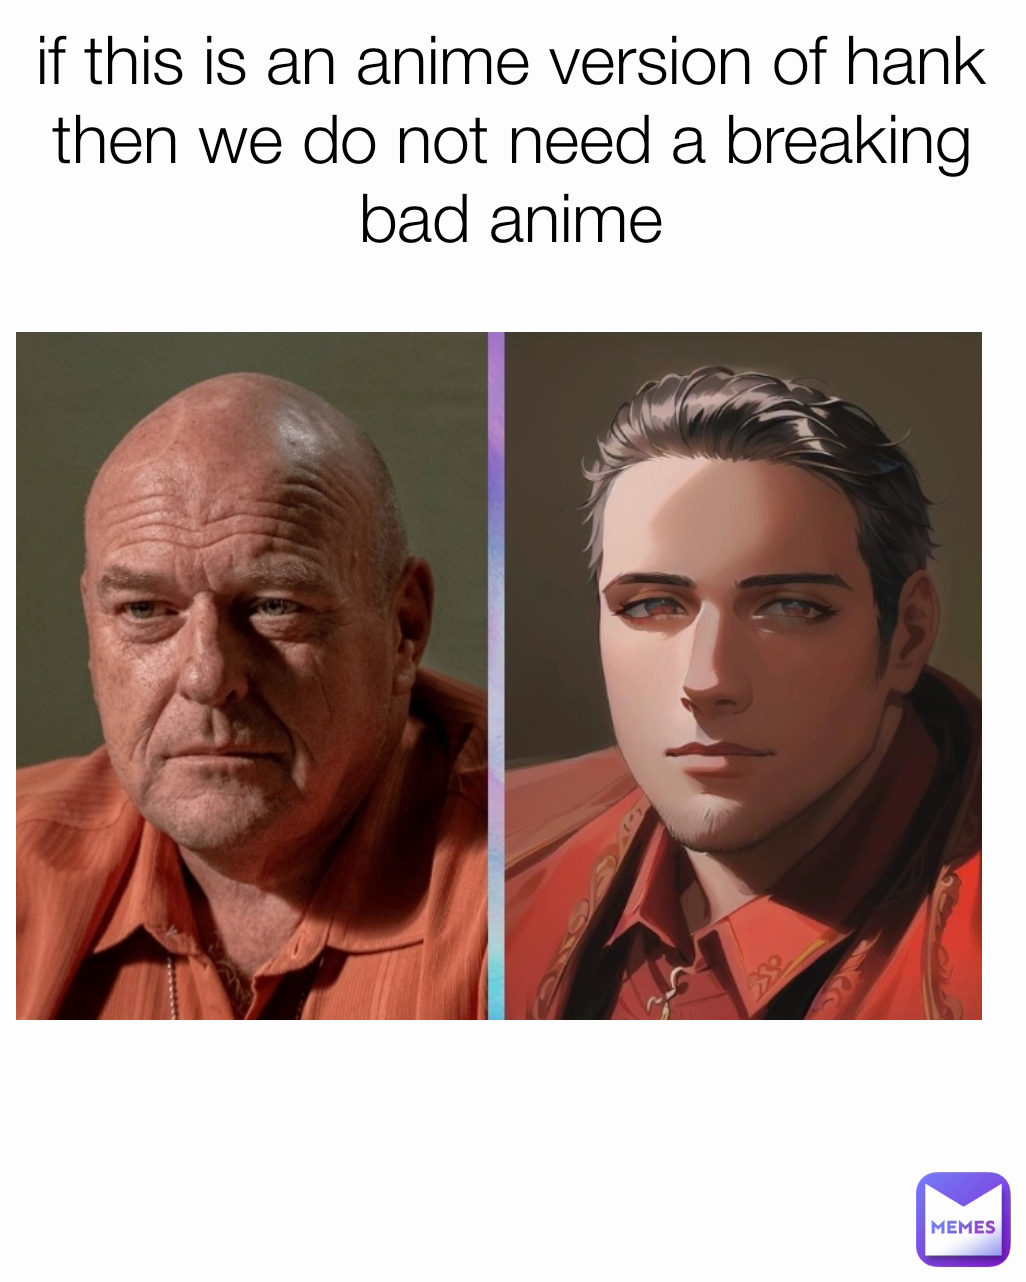 continuation of taking anime memes and replacing a panel with breaking bad  characters from rgoodanimemes this time btw this is the last time im  making this kind of post i feel like